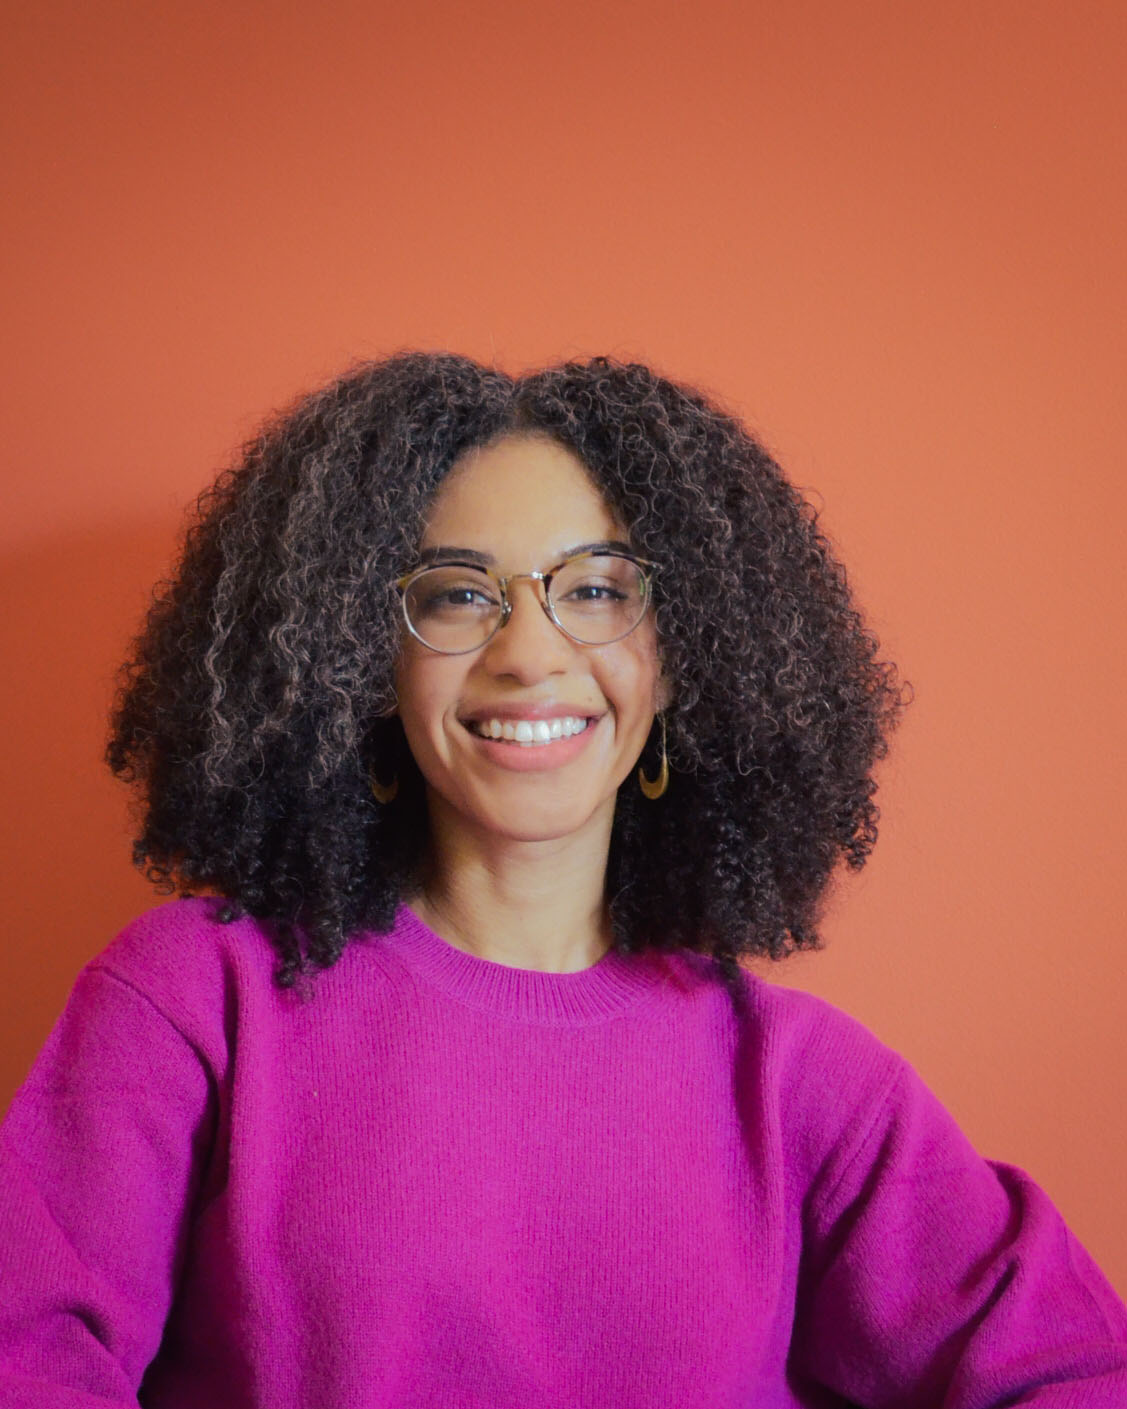 A person with curly shoulder-length hair wearing glasses and a pink sweater smiles at the viewer.